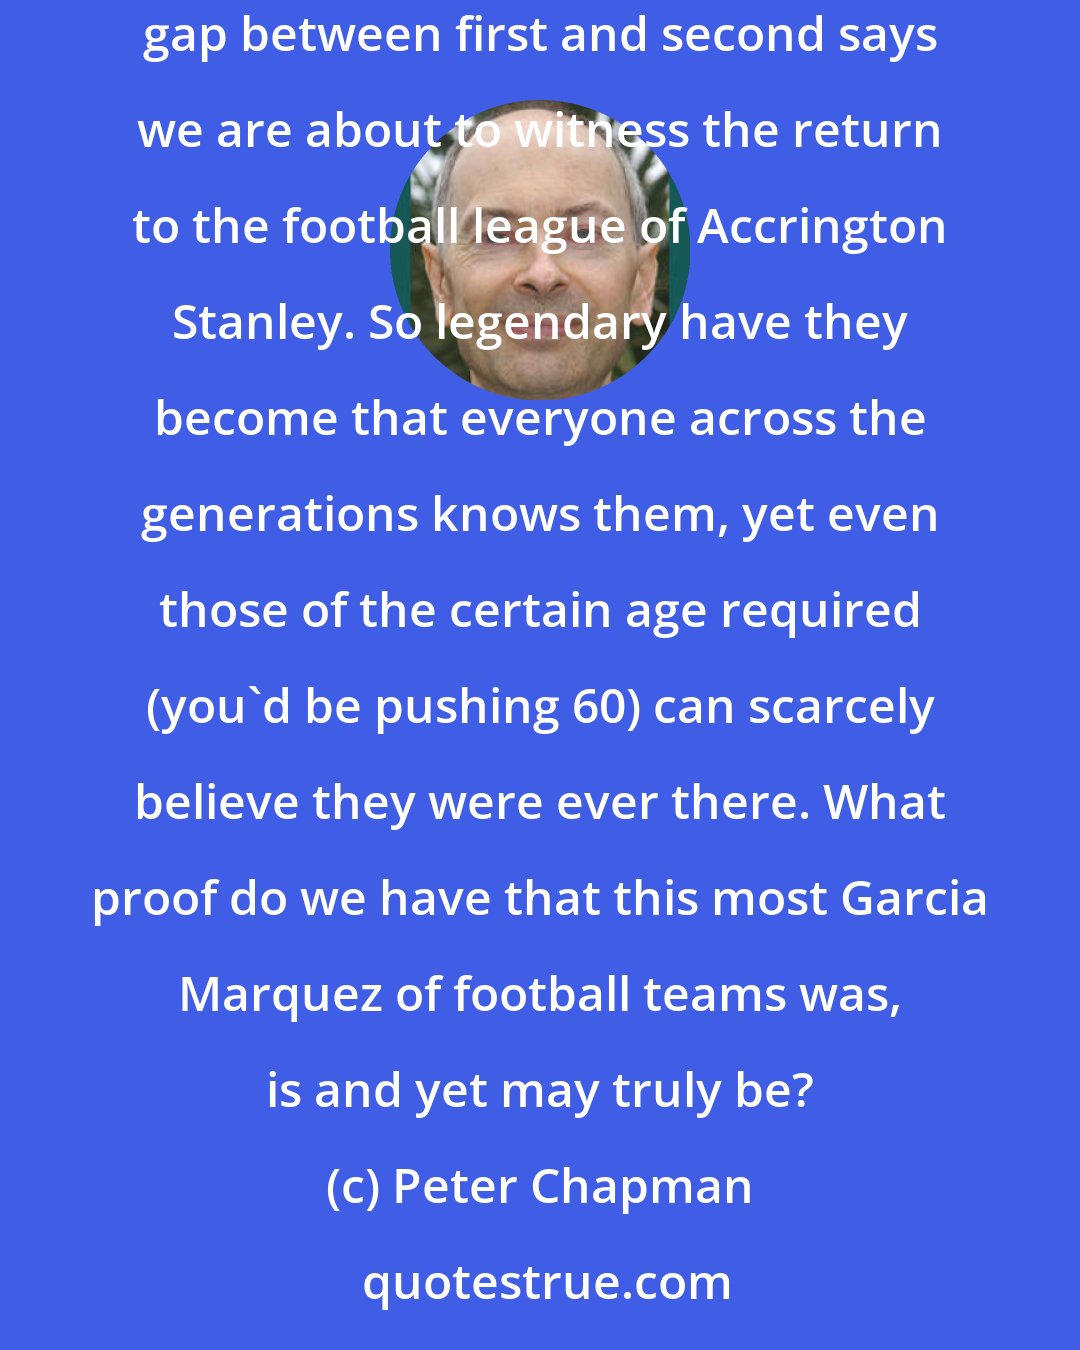 Peter Chapman: For those fed up with the lack of mystery at the top of the Premiership, could I refer you to the commanding heights of the Conference. The wide points gap between first and second says we are about to witness the return to the football league of Accrington Stanley. So legendary have they become that everyone across the generations knows them, yet even those of the certain age required (you'd be pushing 60) can scarcely believe they were ever there. What proof do we have that this most Garcia Marquez of football teams was, is and yet may truly be?